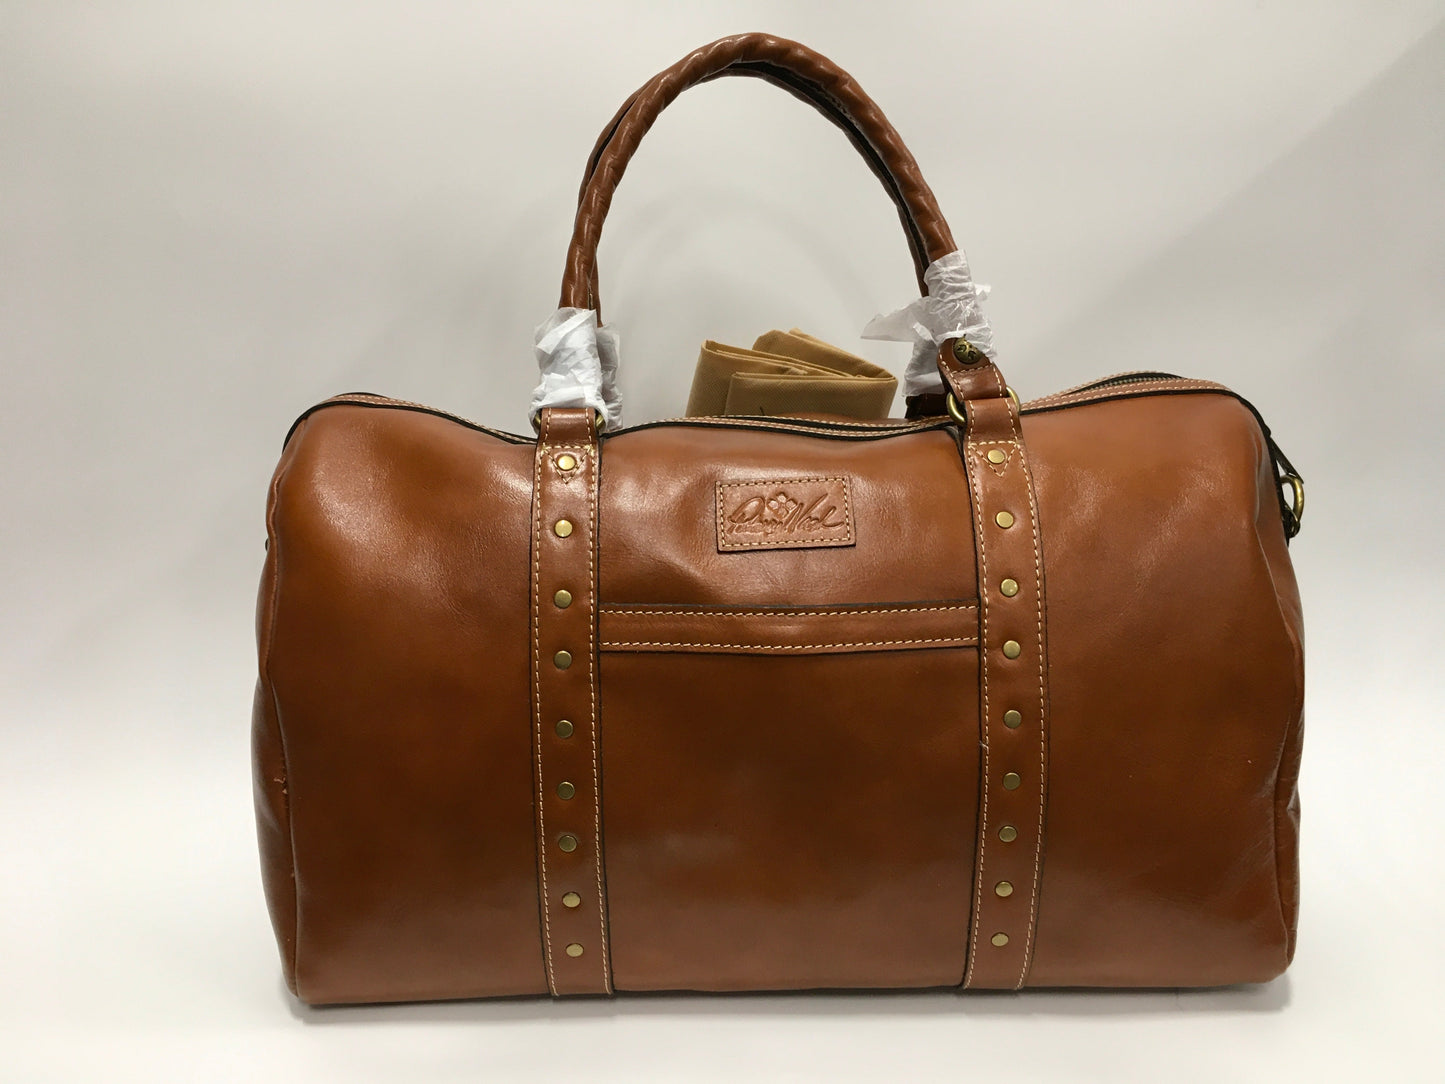 Duffle And Weekender Leather Patricia Nash, Size Large